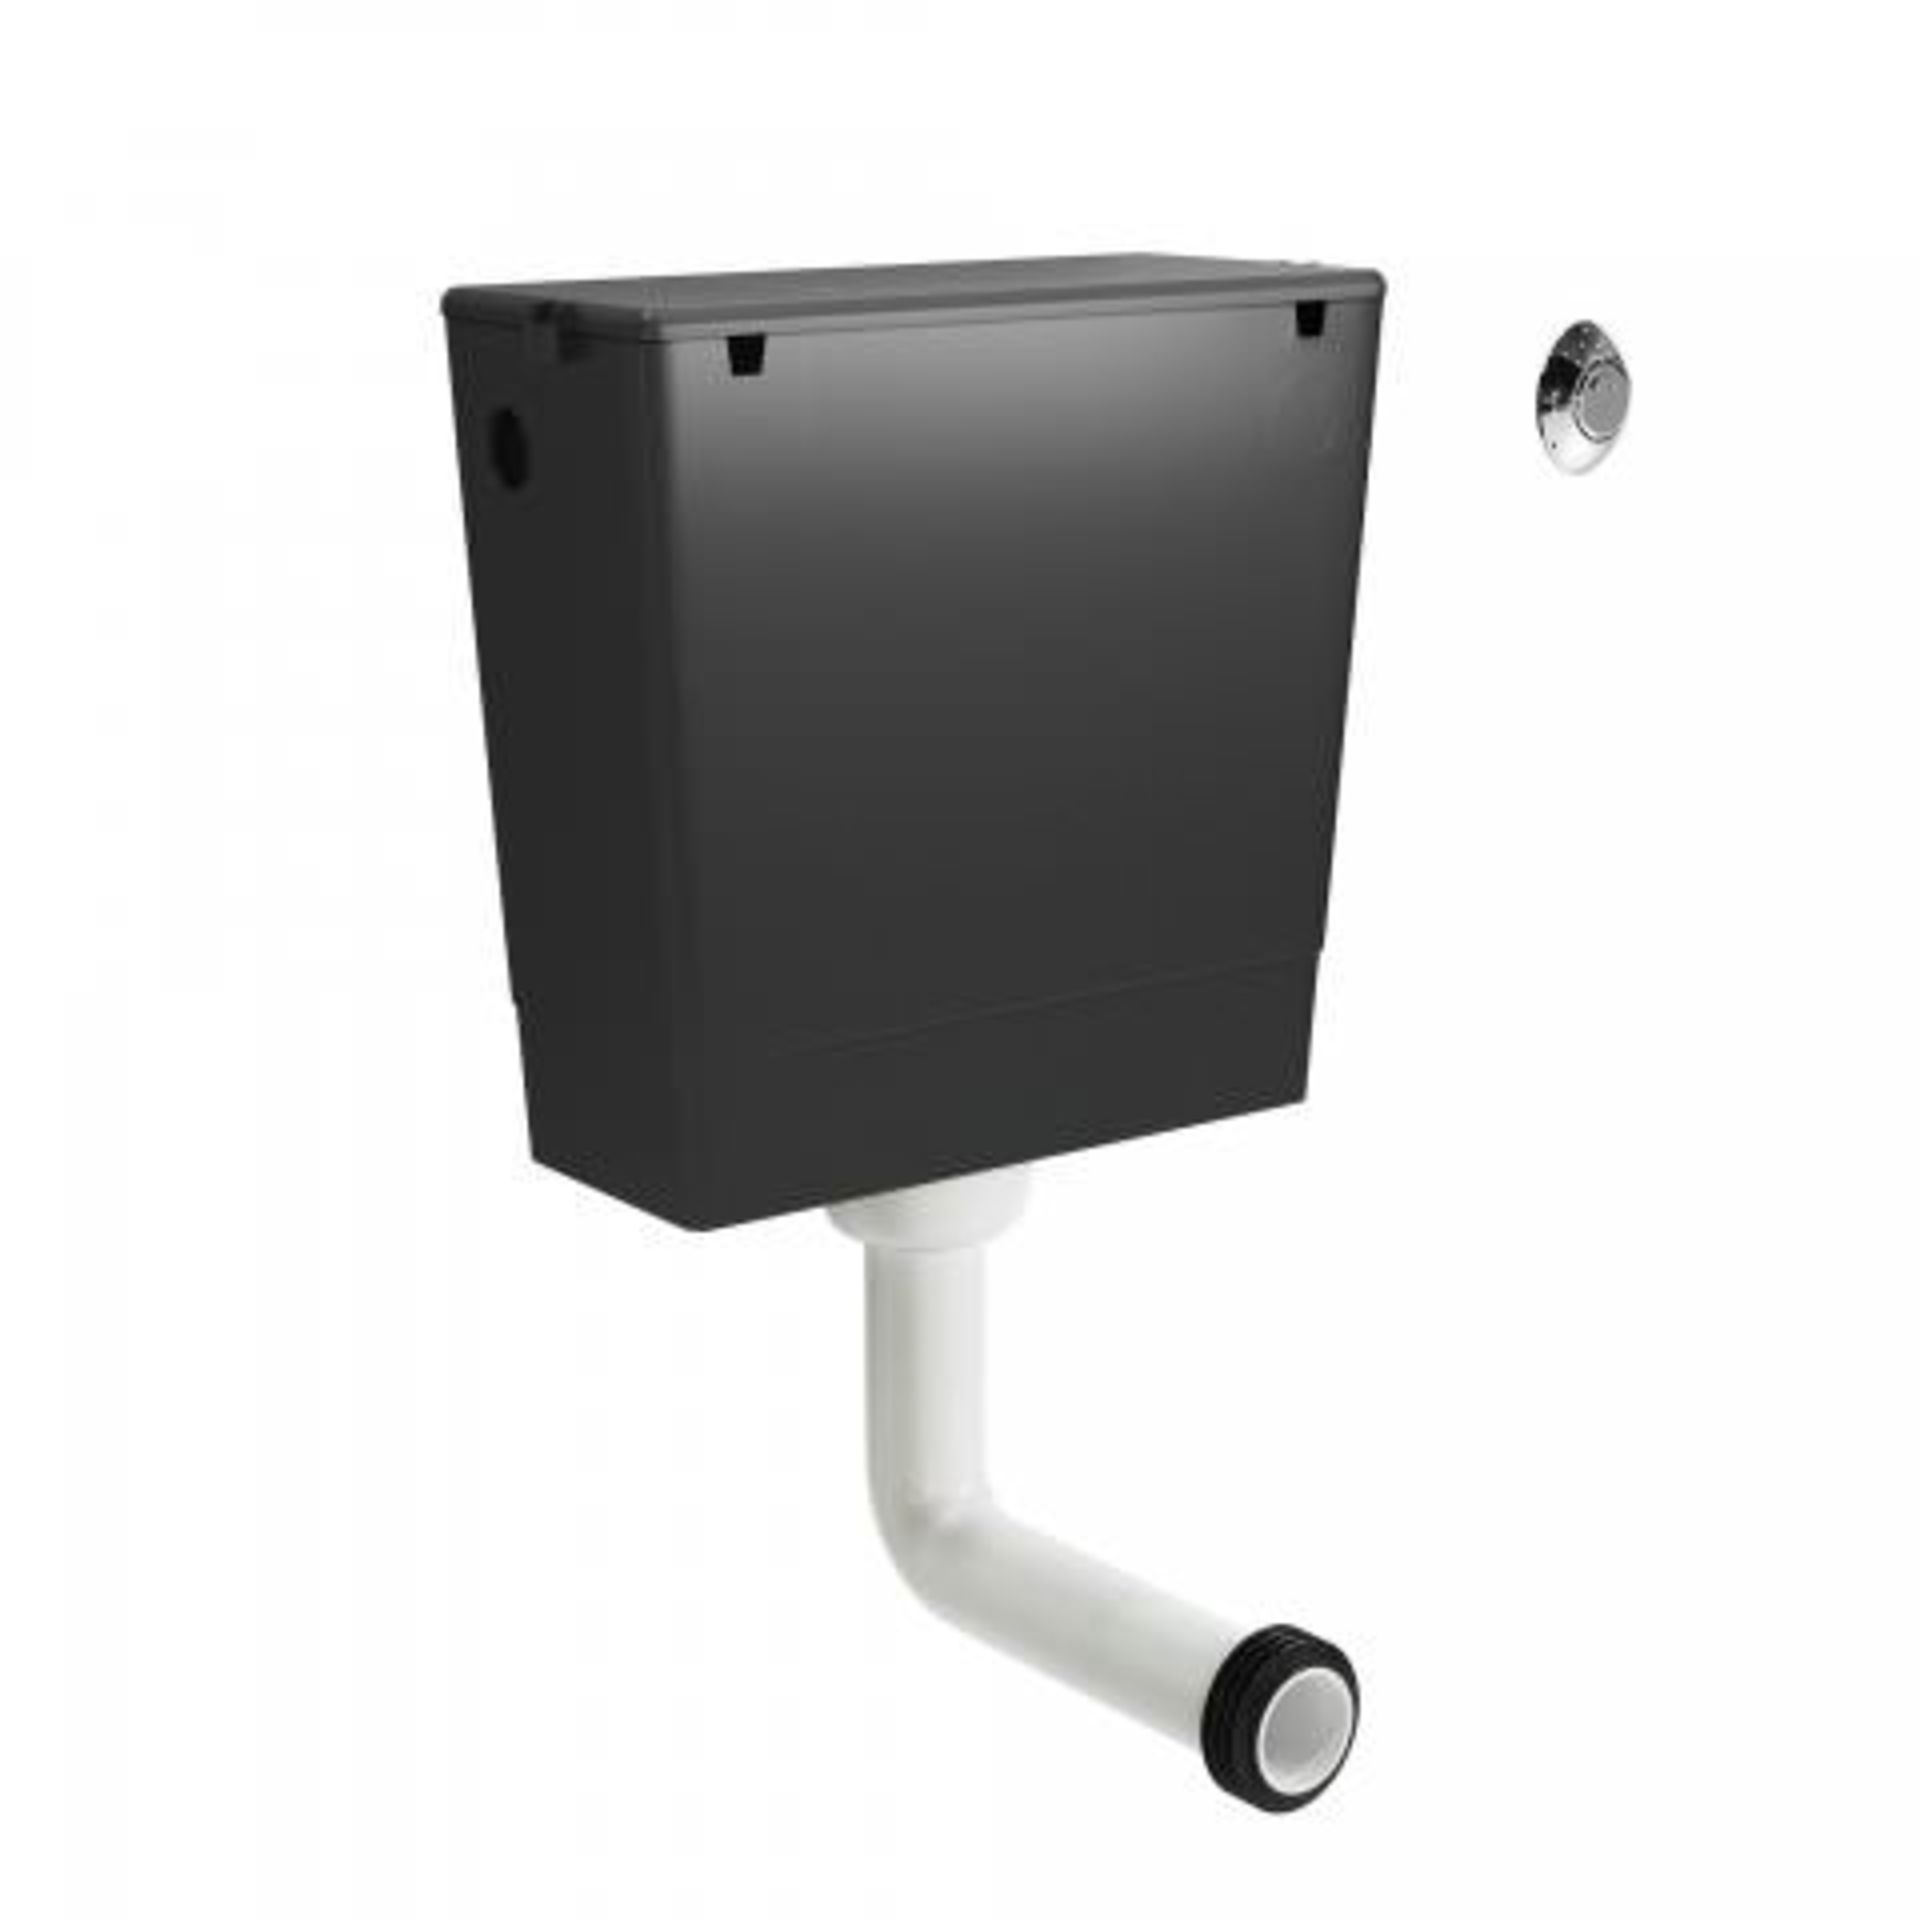 (M164) Wirquin Dual Flush Concealed Cistern. RRP £69.99. This Dual Flush Concealed Cistern is - Image 2 of 4